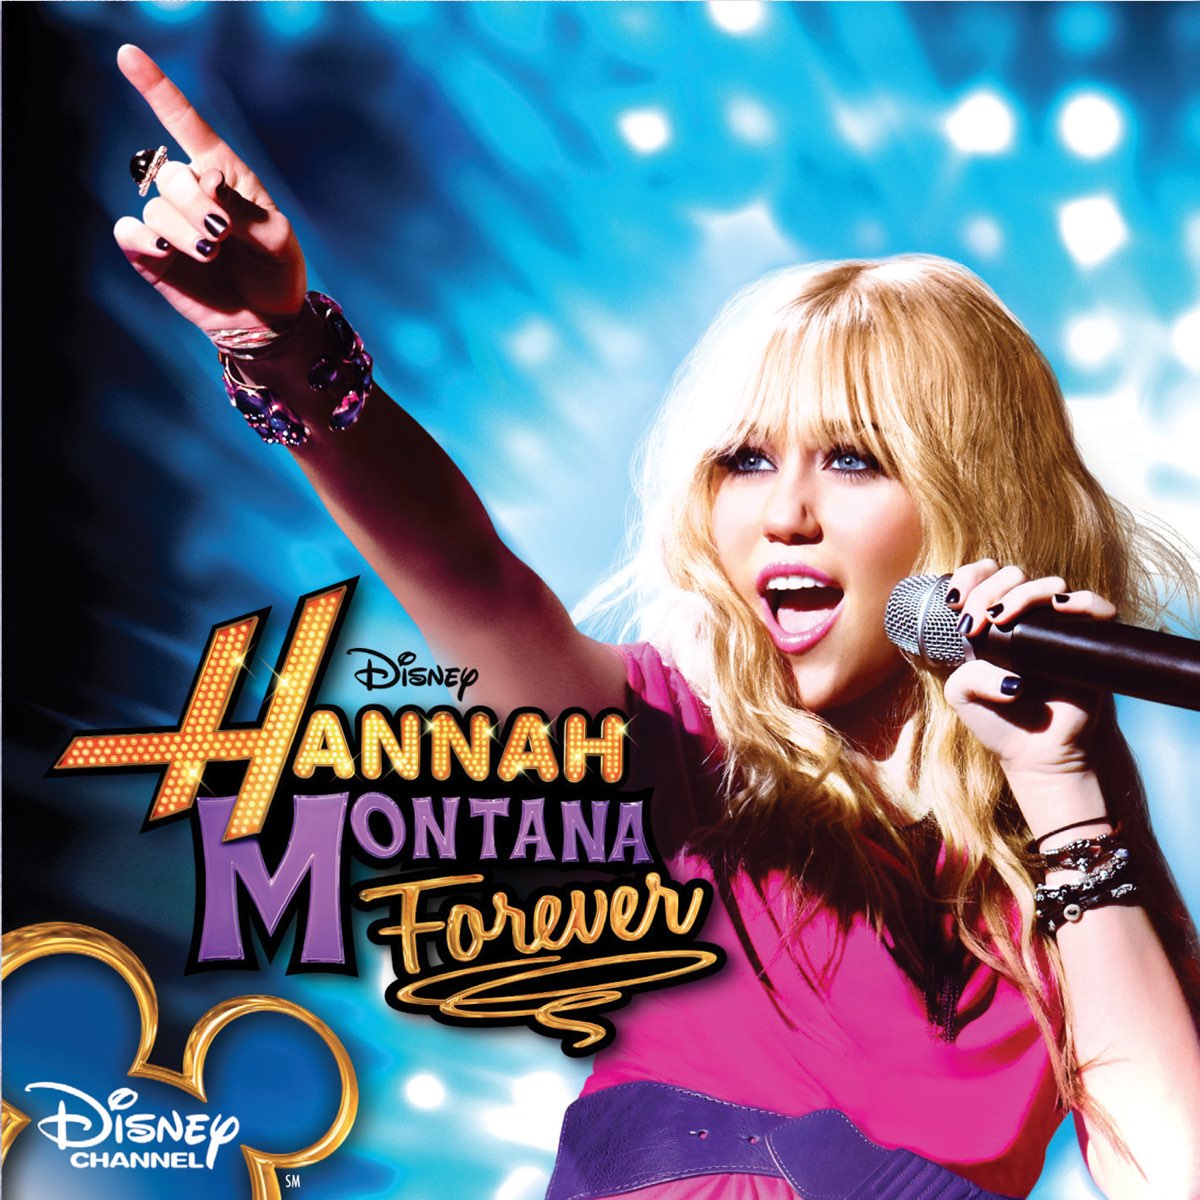 ‎Hannah Montana Forever (Soundtrack from the TV Series) by Hannah